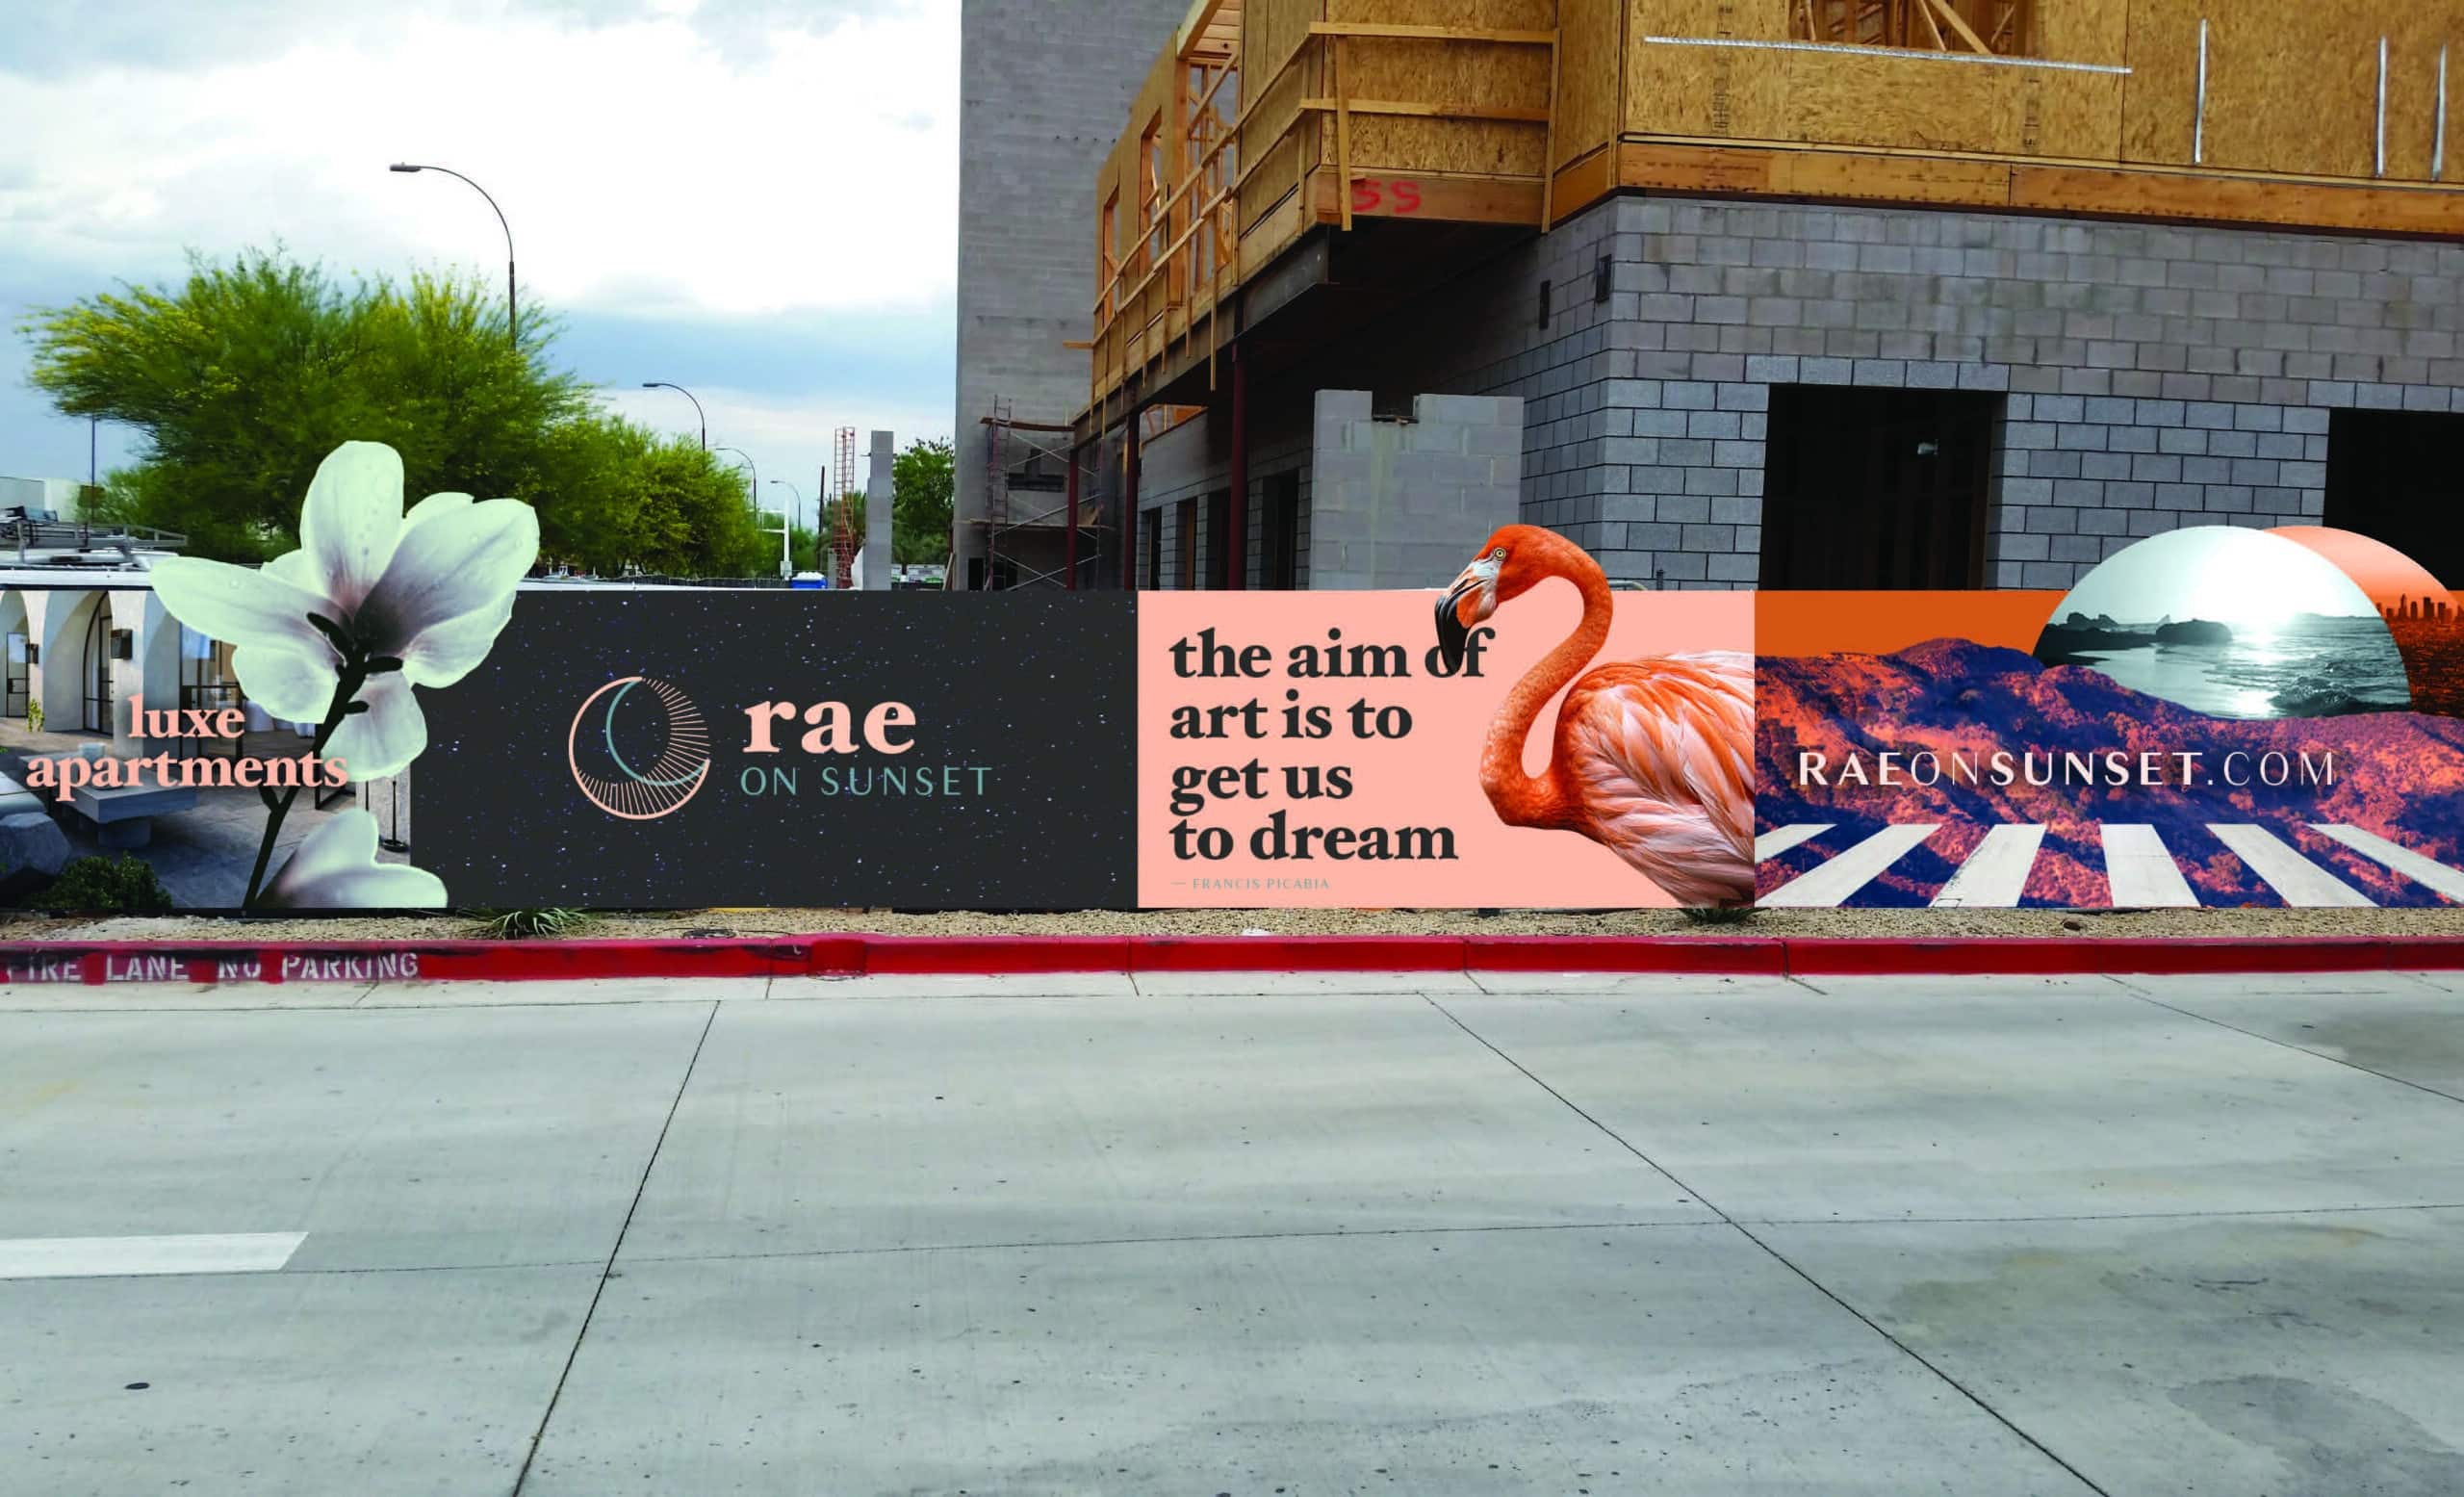 A construction billboard with a pink flamingo on it, with text that reads: "The aim of art is to get us to dream."